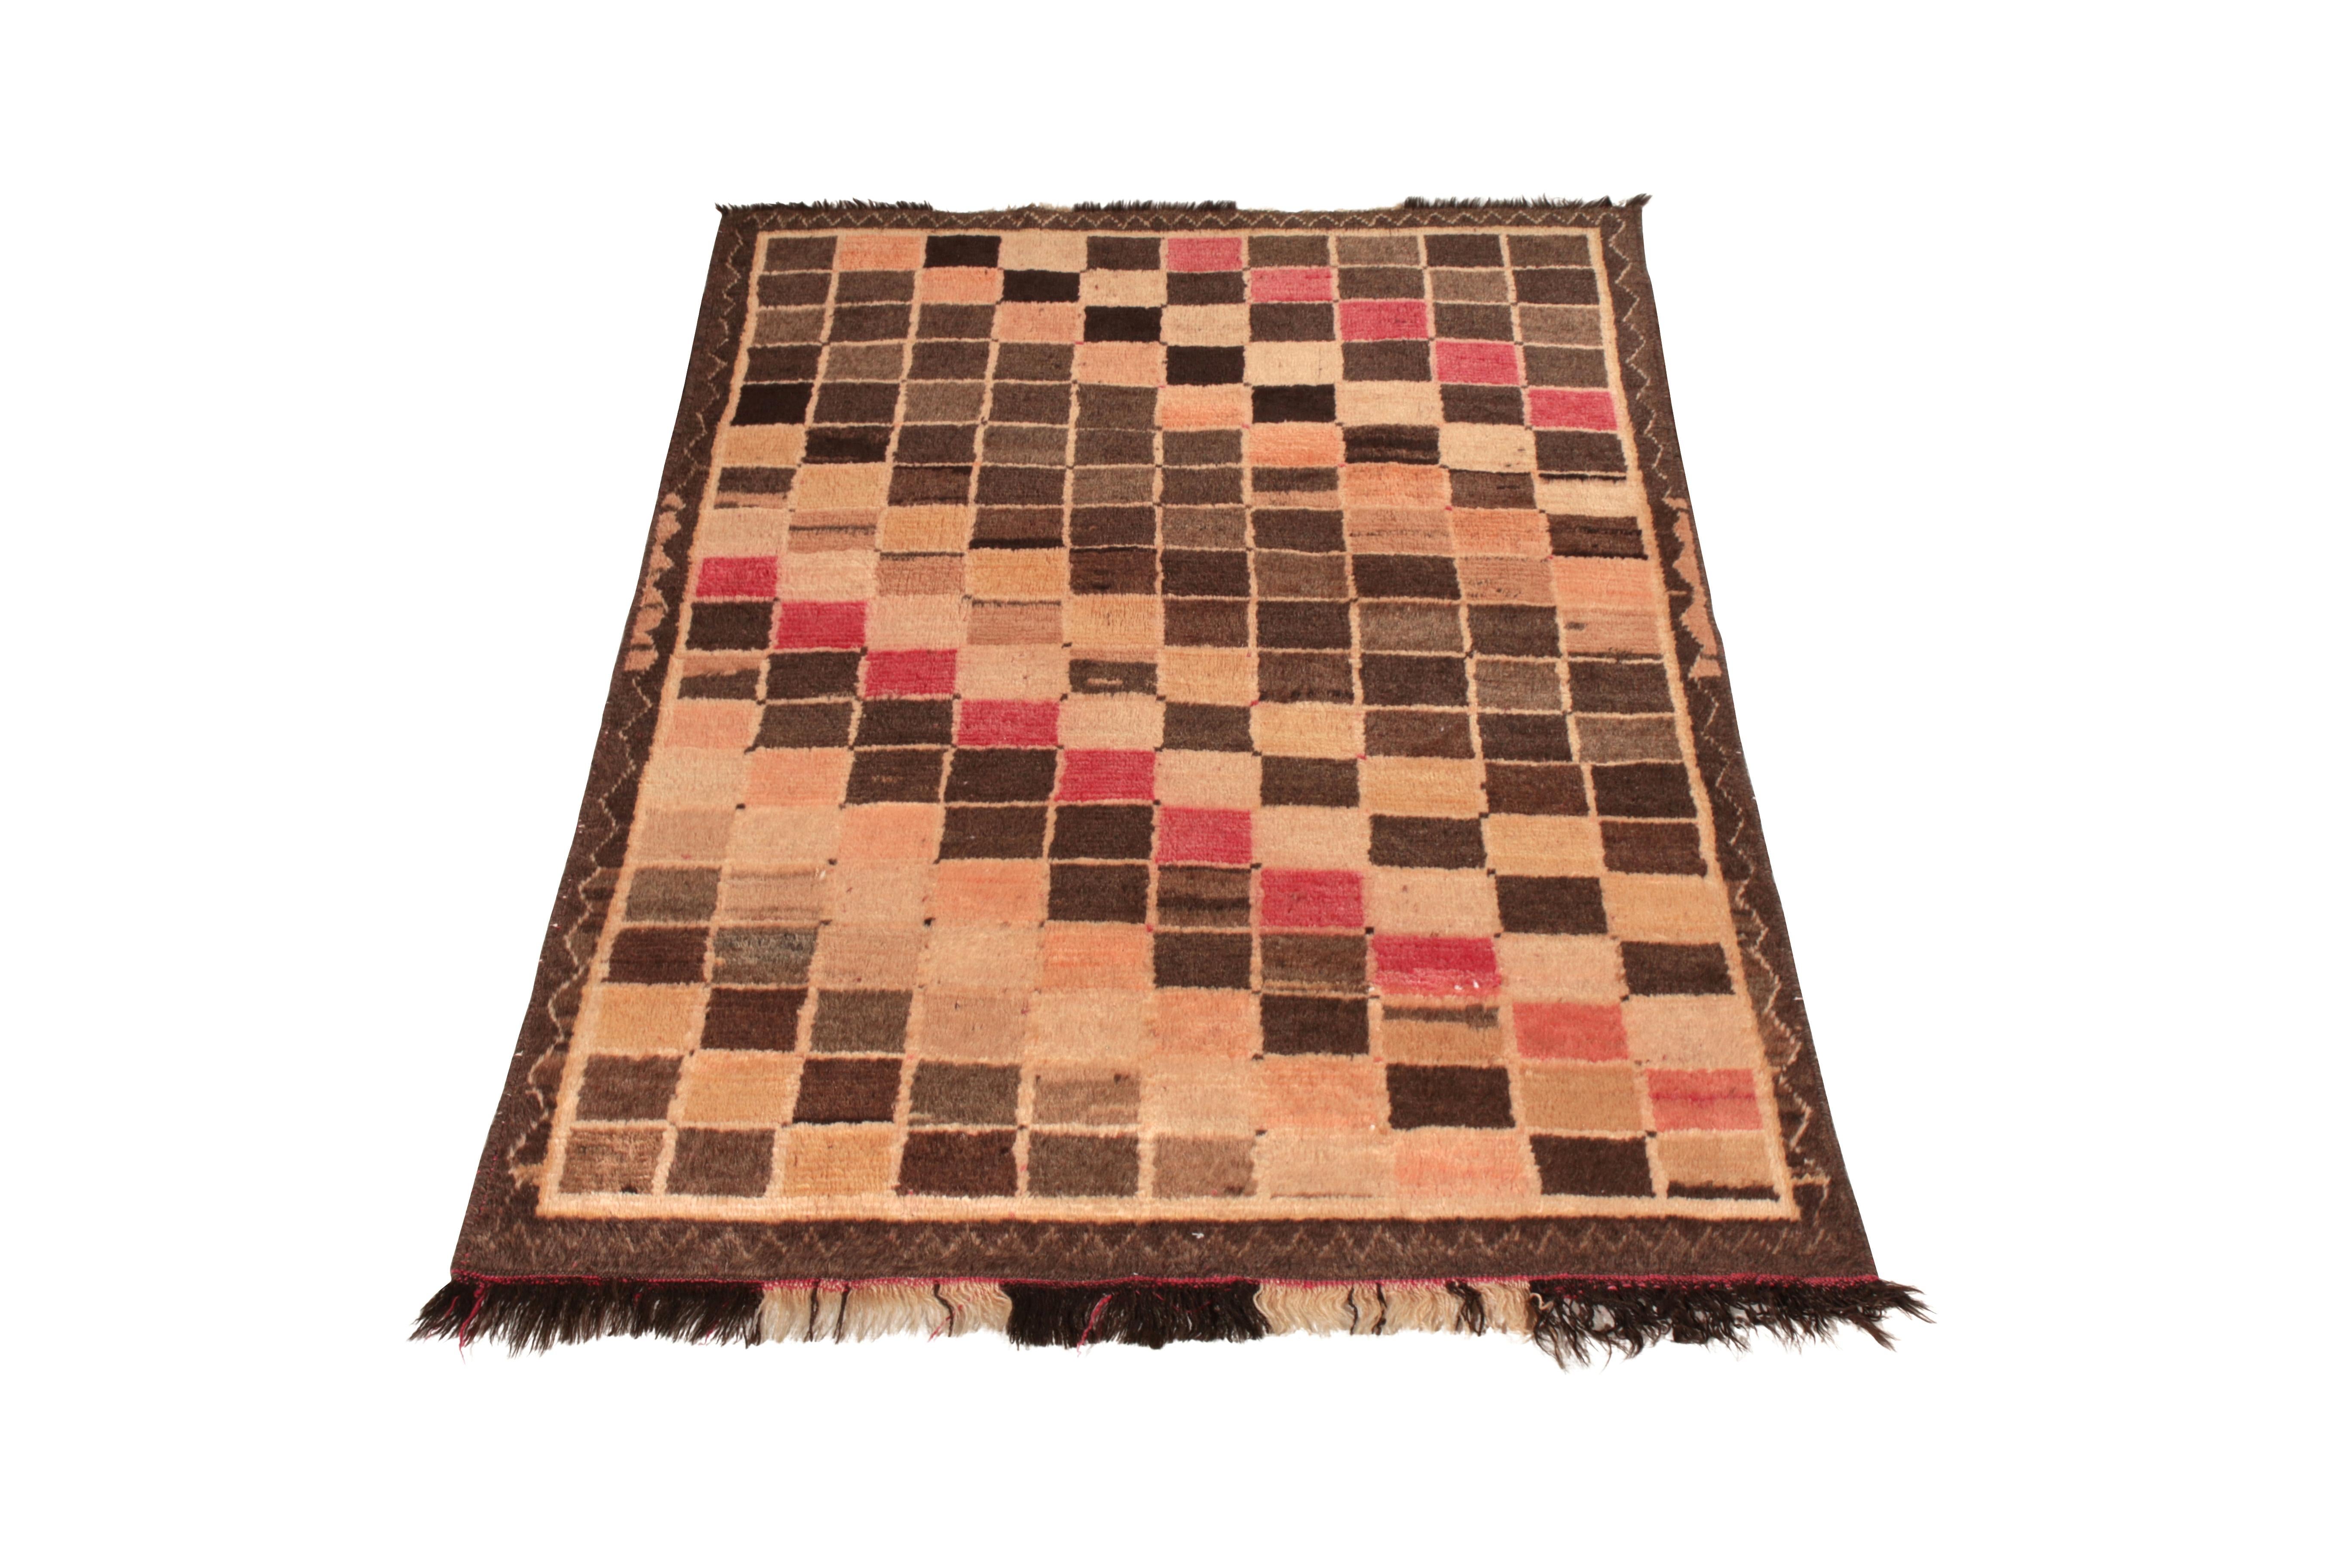 Hand knotted in wool originating circa 1950-1960, this midcentury Persian rug connotes a vintage Gabbeh rug design of exceptional Mid-Century Modern sensibility, offering the Classic beige-brown pallet this family is known for pairing with its lush